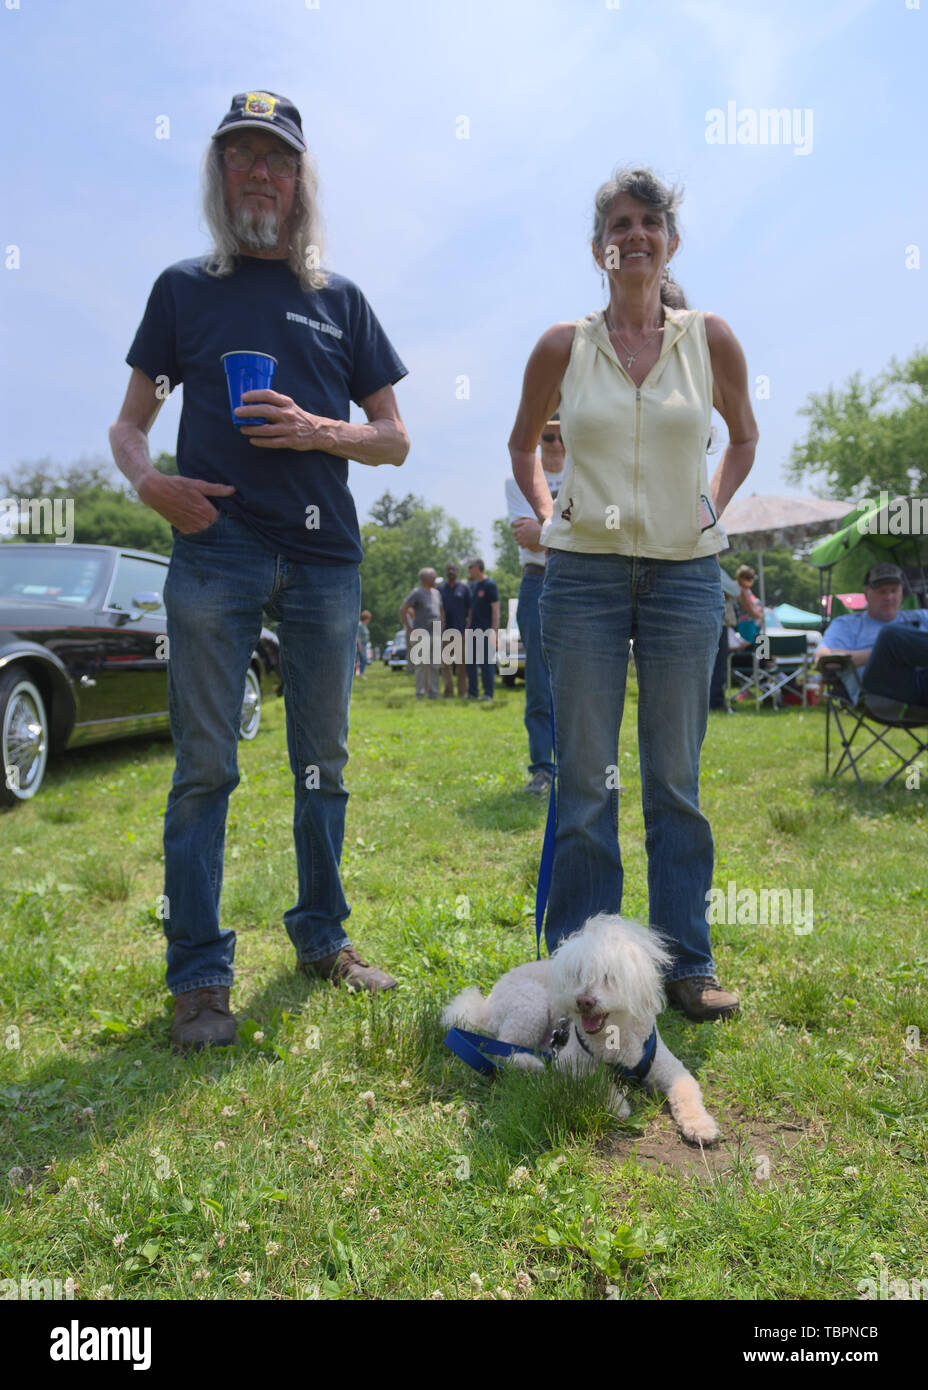 Old Westbury, New York, USA. 2nd June, 2019. L-R, RUSTY BECKER and DEBBIE DUGAN, both of Glen Head, and SAMMY, a 14-year-old Bichon Poo, a Bichon Poodle cross (Bichapoo), are at the 53rd Annual Spring Meet Antique Car Show. Dugan entered her 1951 Chevy pickup truck in the show. Event was sponsored by the Greater NY Region (NYGR) of the Antique Car Club of America (AACA), at Old Westbury Gardens, a Long Island Gold Coast estate. Credit: Ann Parry/ZUMA Wire/Alamy Live News Stock Photo